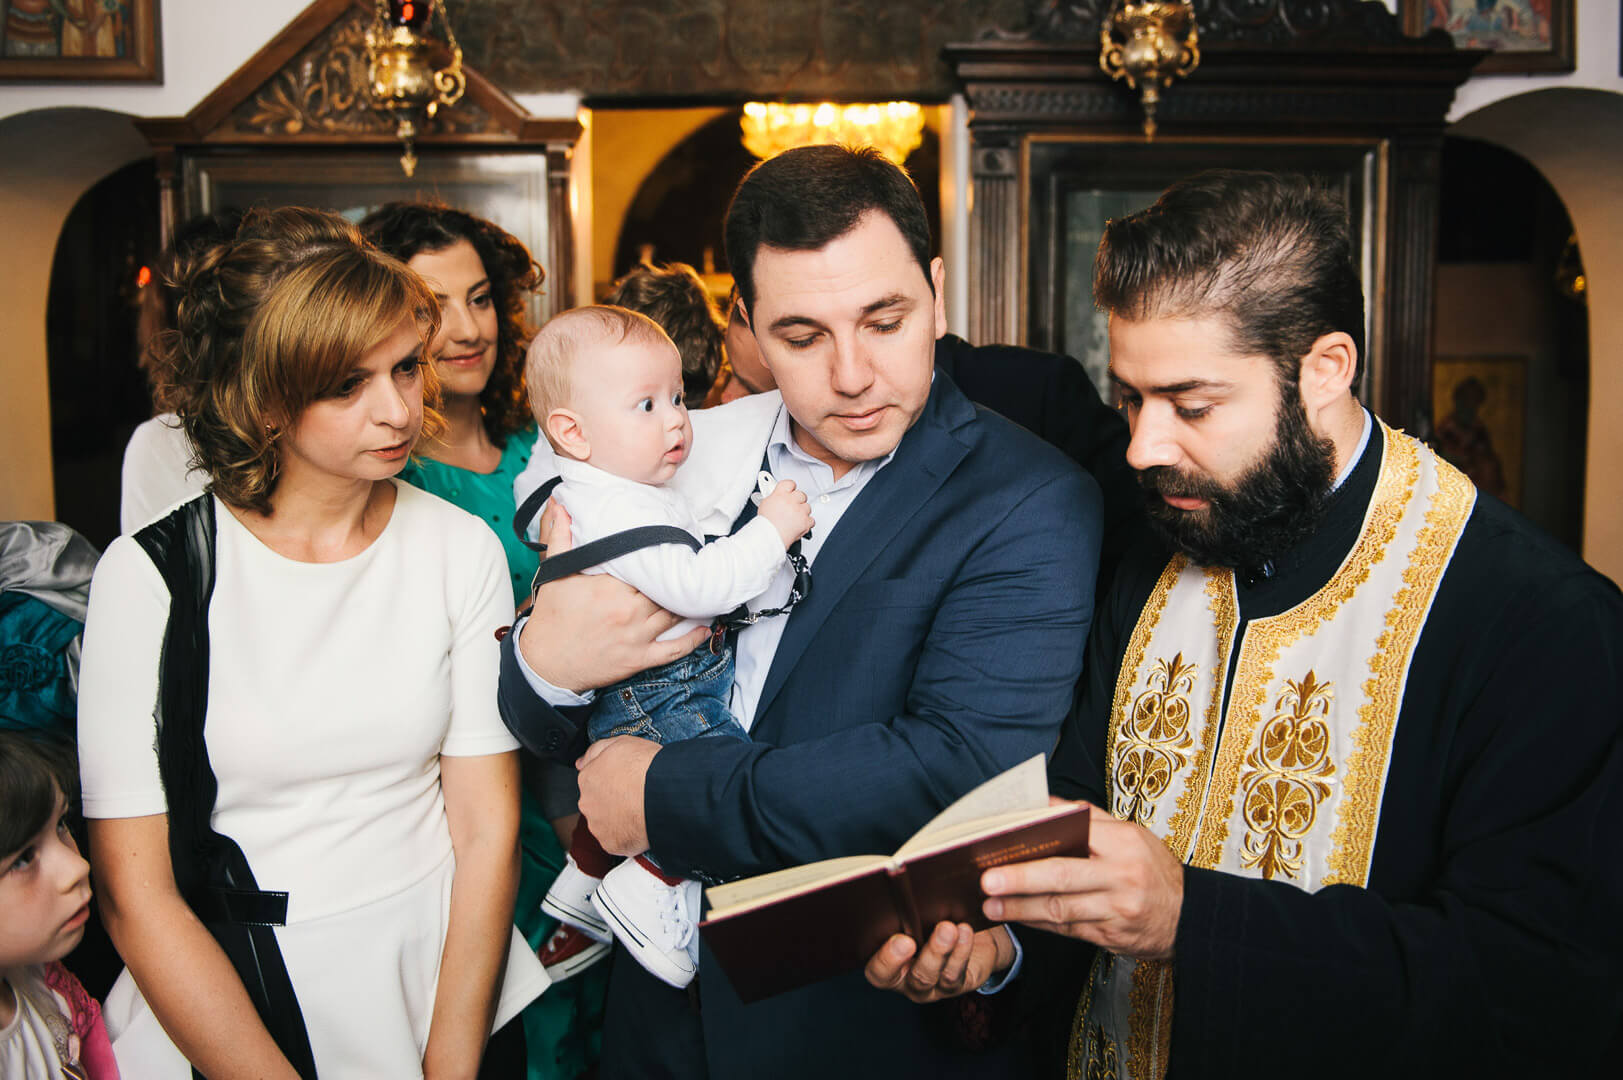 Meaningful christening moment: godfather leads blessings with care, priest guides the ceremony.